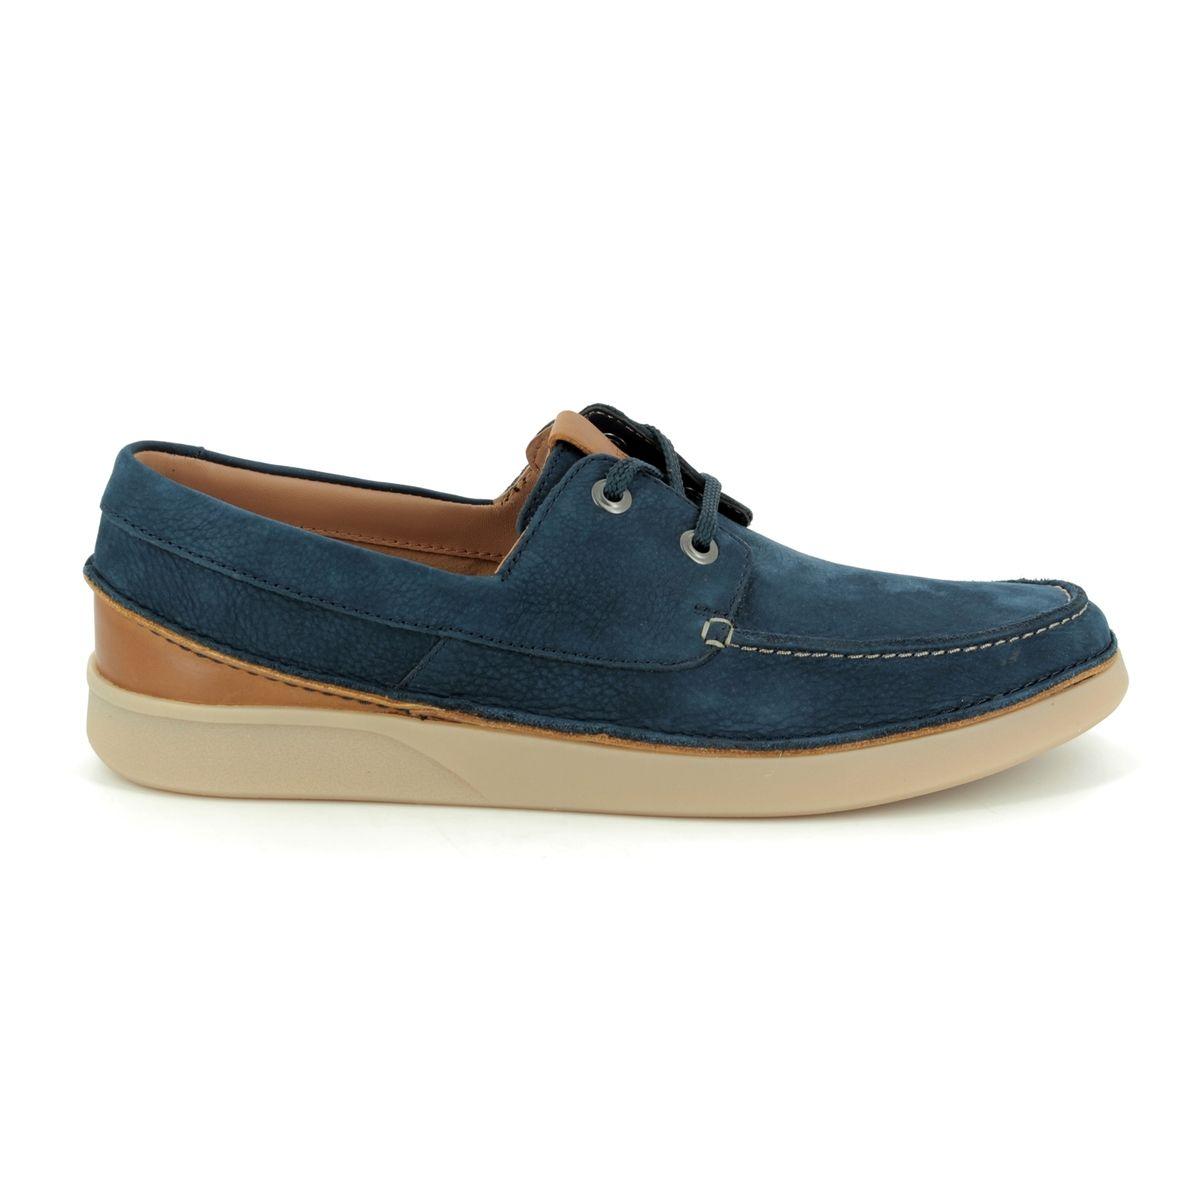 Oakland Sun G Fit Navy nubuck casual shoes